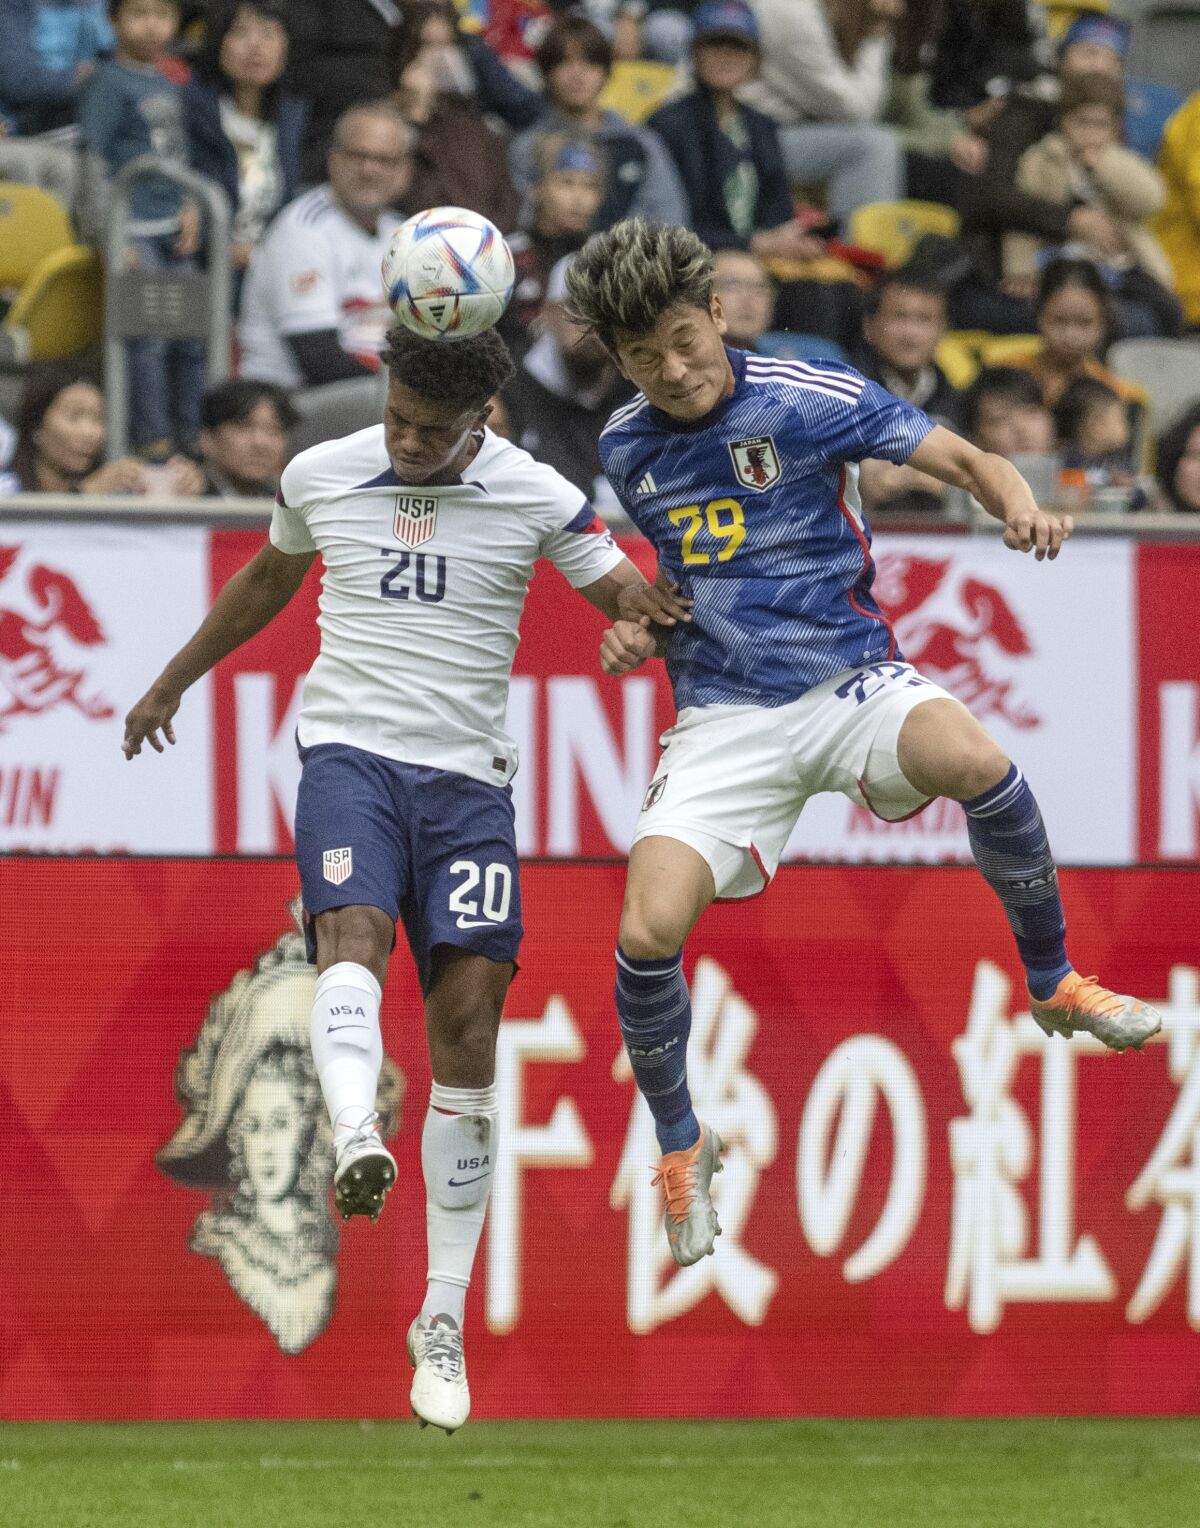 Japan's Machino Shuto, right, and Reggie Cannon from the USA try to get the ball during the international friendly soccer match between USA and Japan as part of the Kirin Challenge Cup in Duesseldorf, Germany, Friday, Sept. 23, 2022. (Bernd Thissen/dpa via AP)